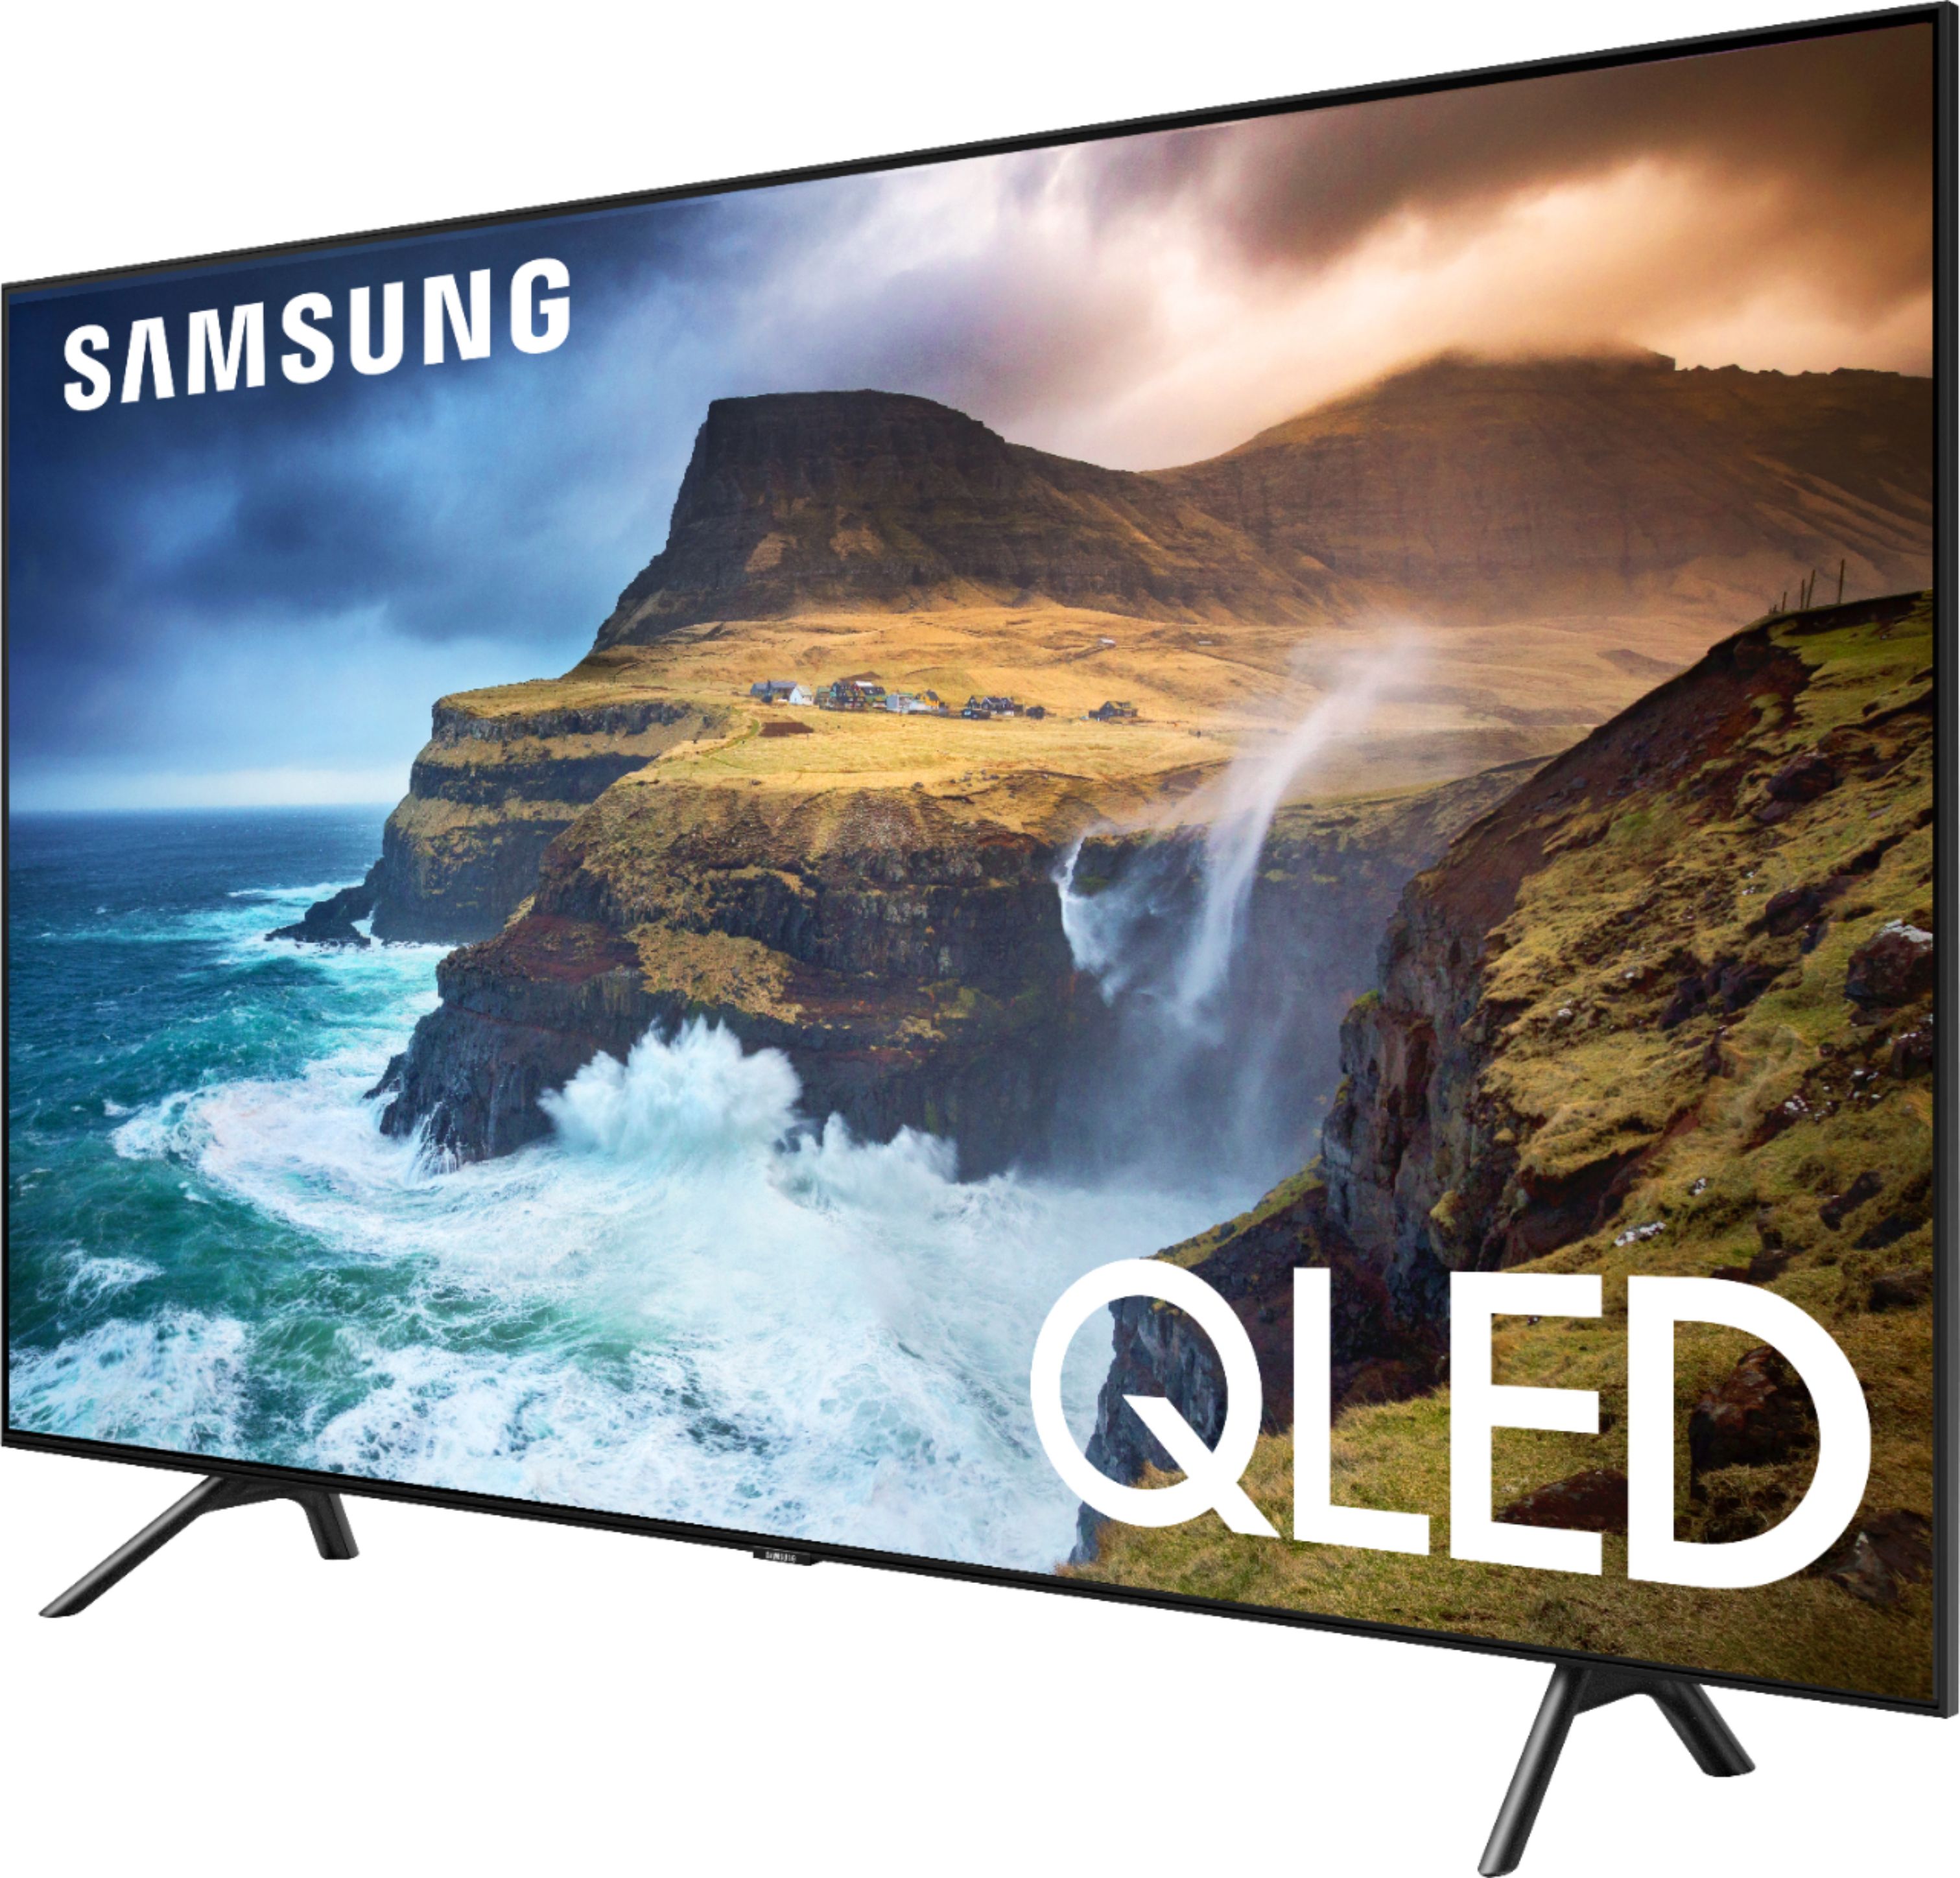 Questions and Answers Samsung 85" Class LED Q70 Series 2160p Smart 4K